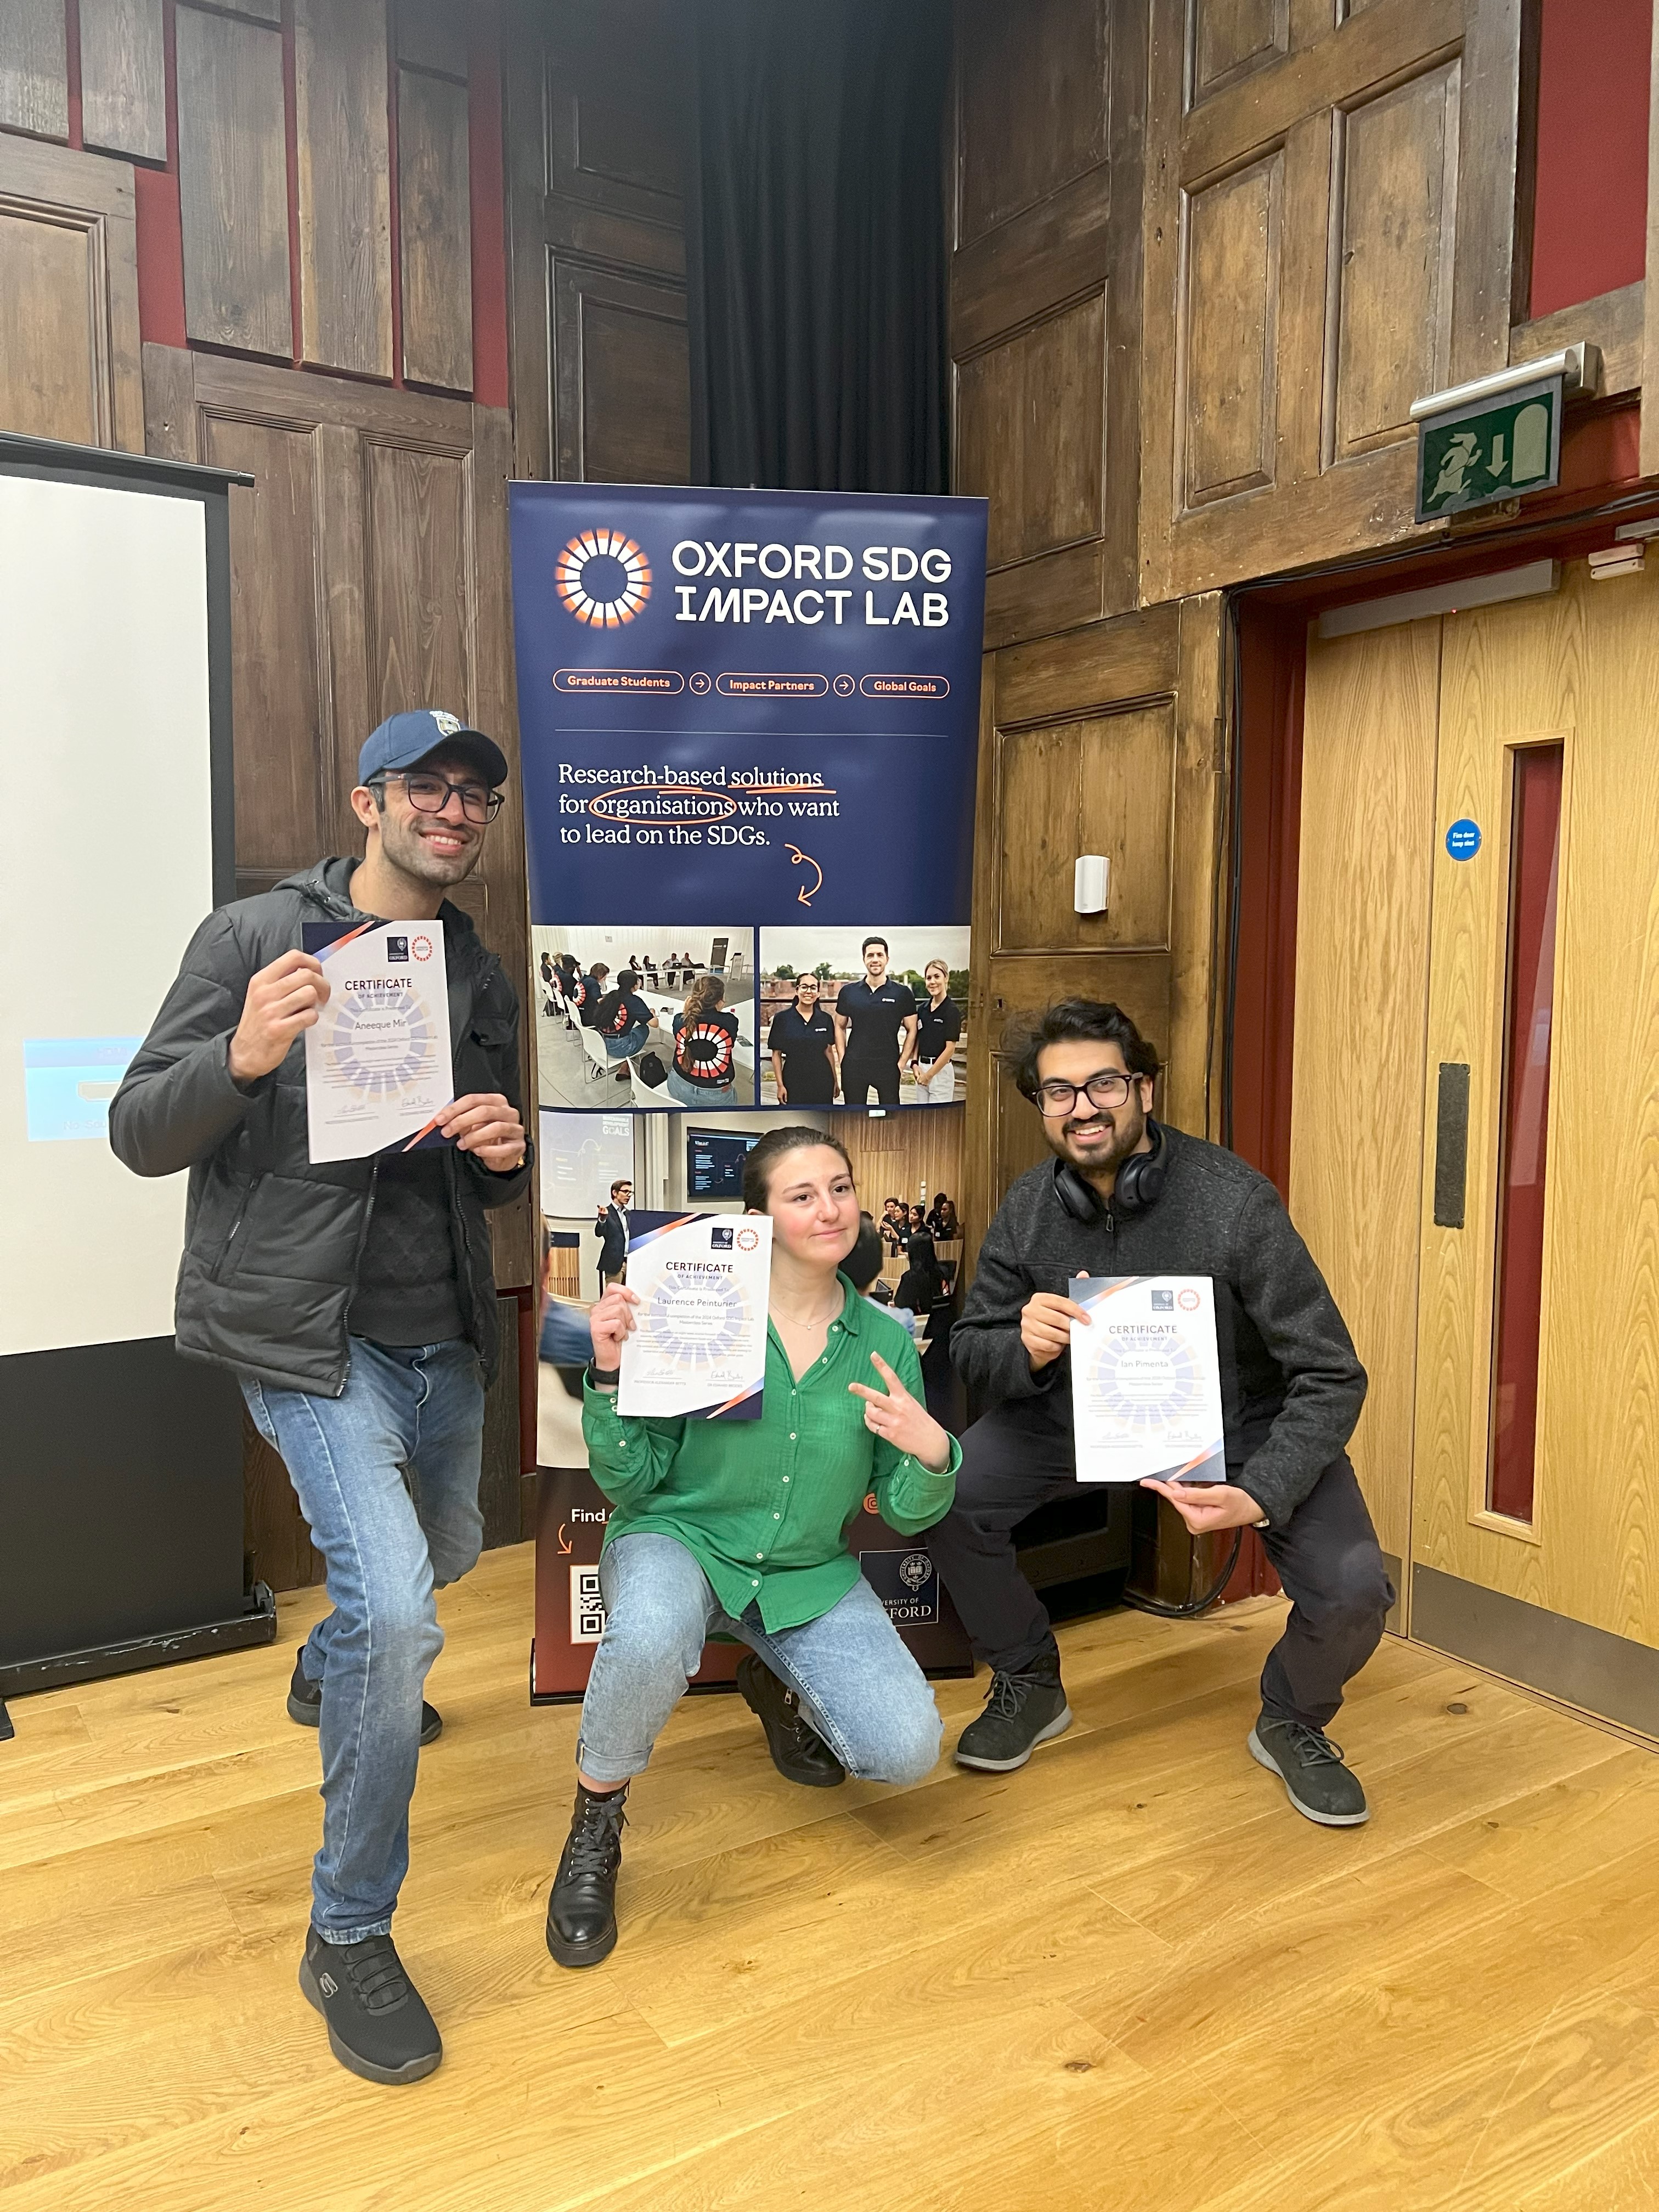 Fellows with Masterclass Certificates